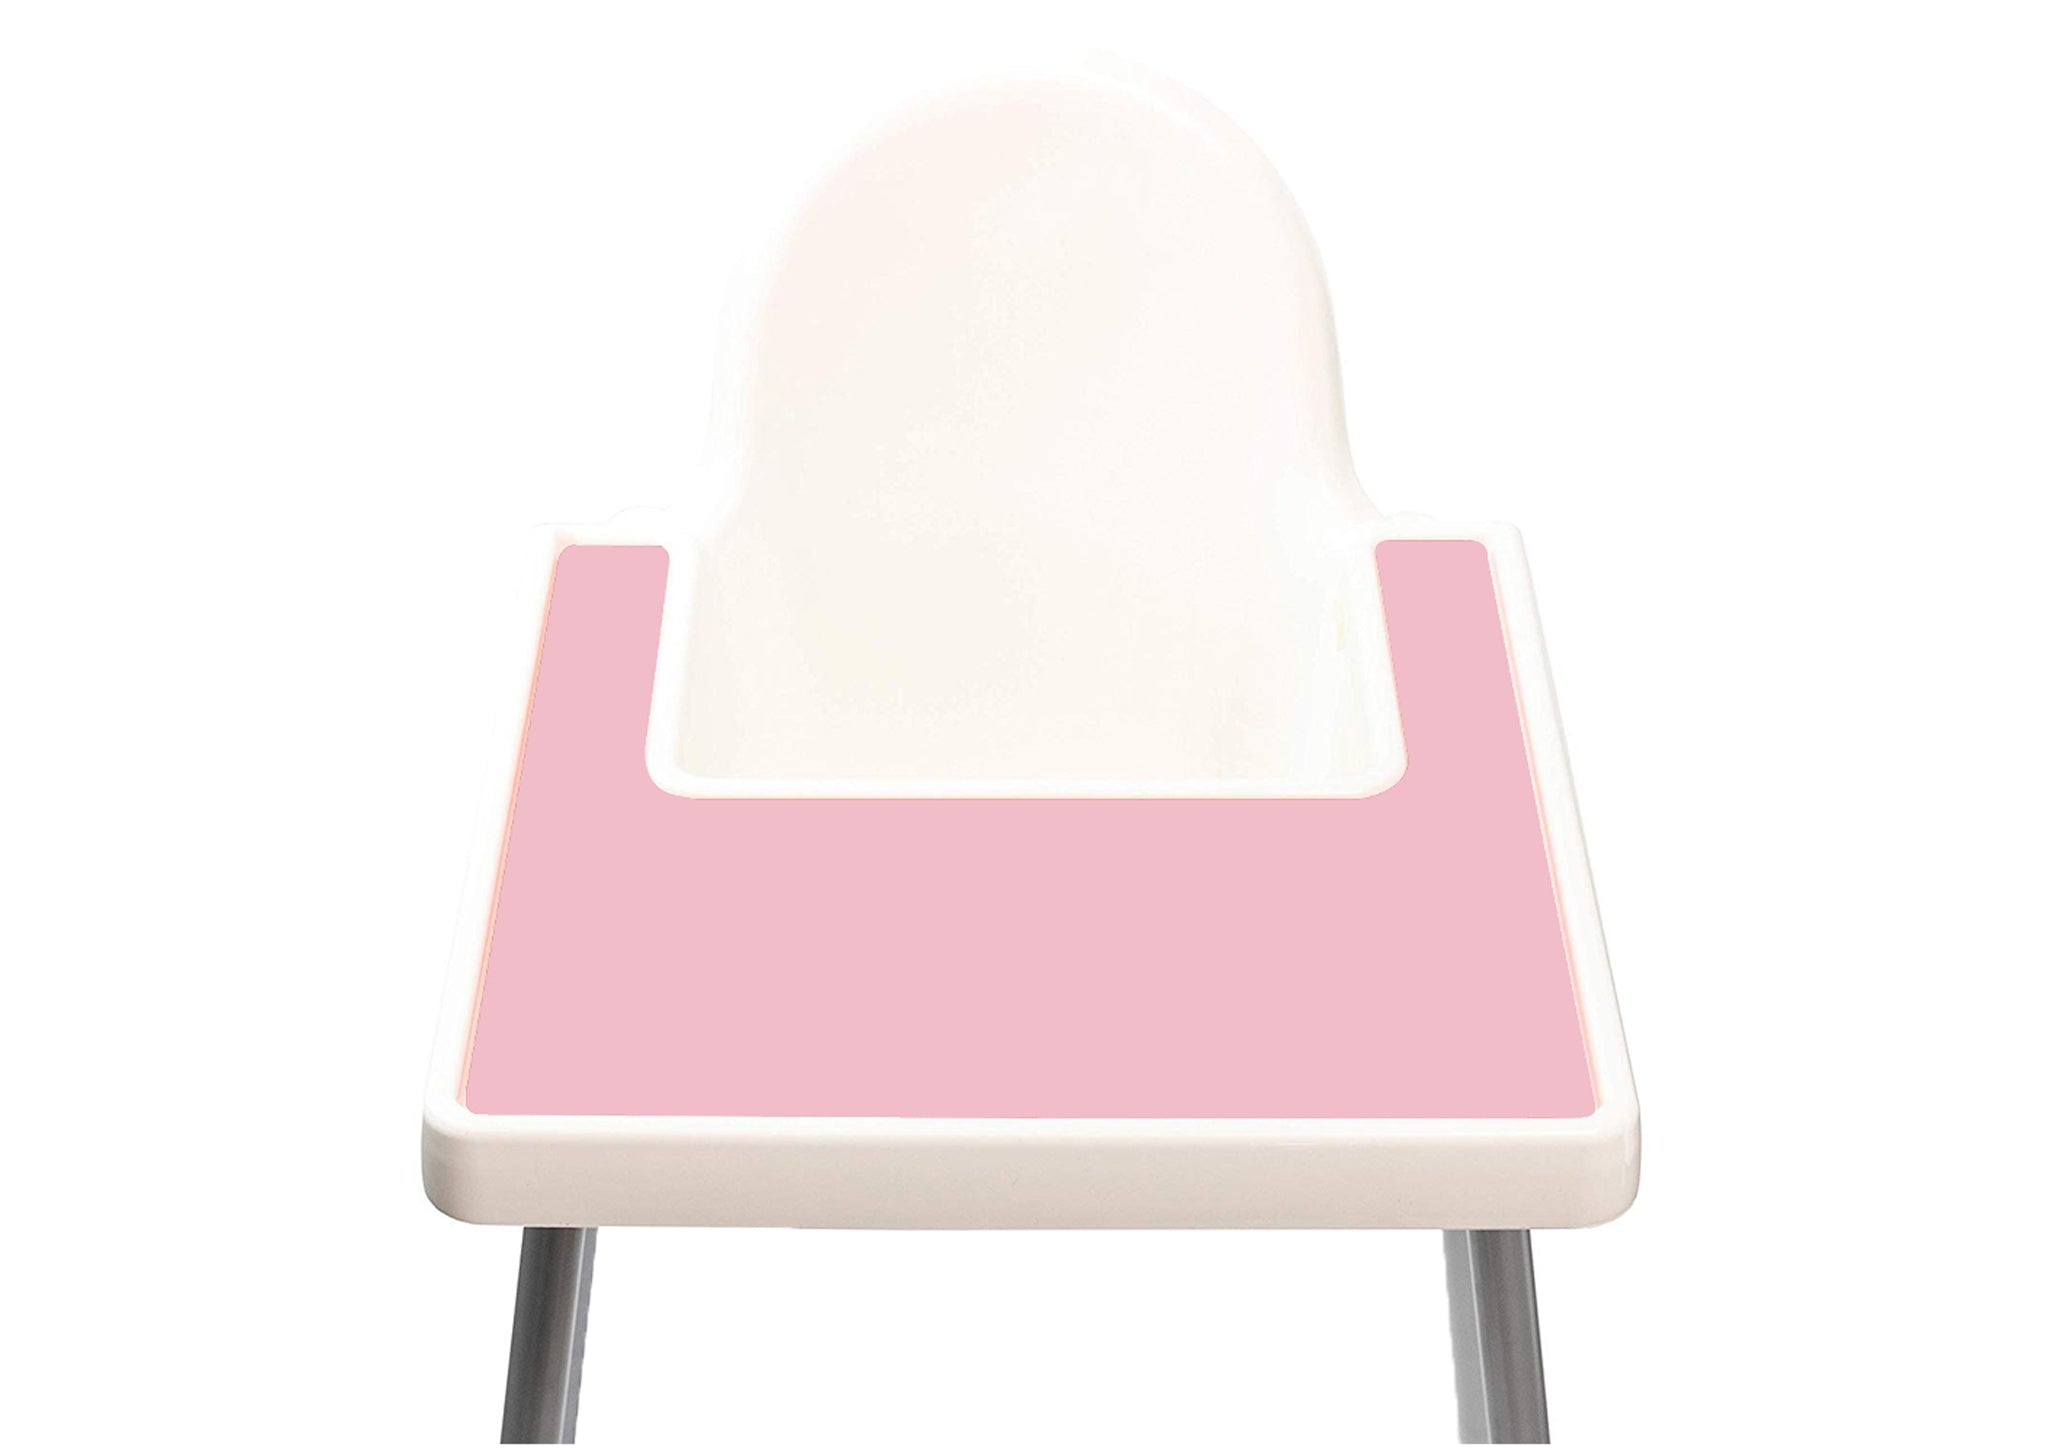 Tray place mat for IKEA Highchair - Blush Pink